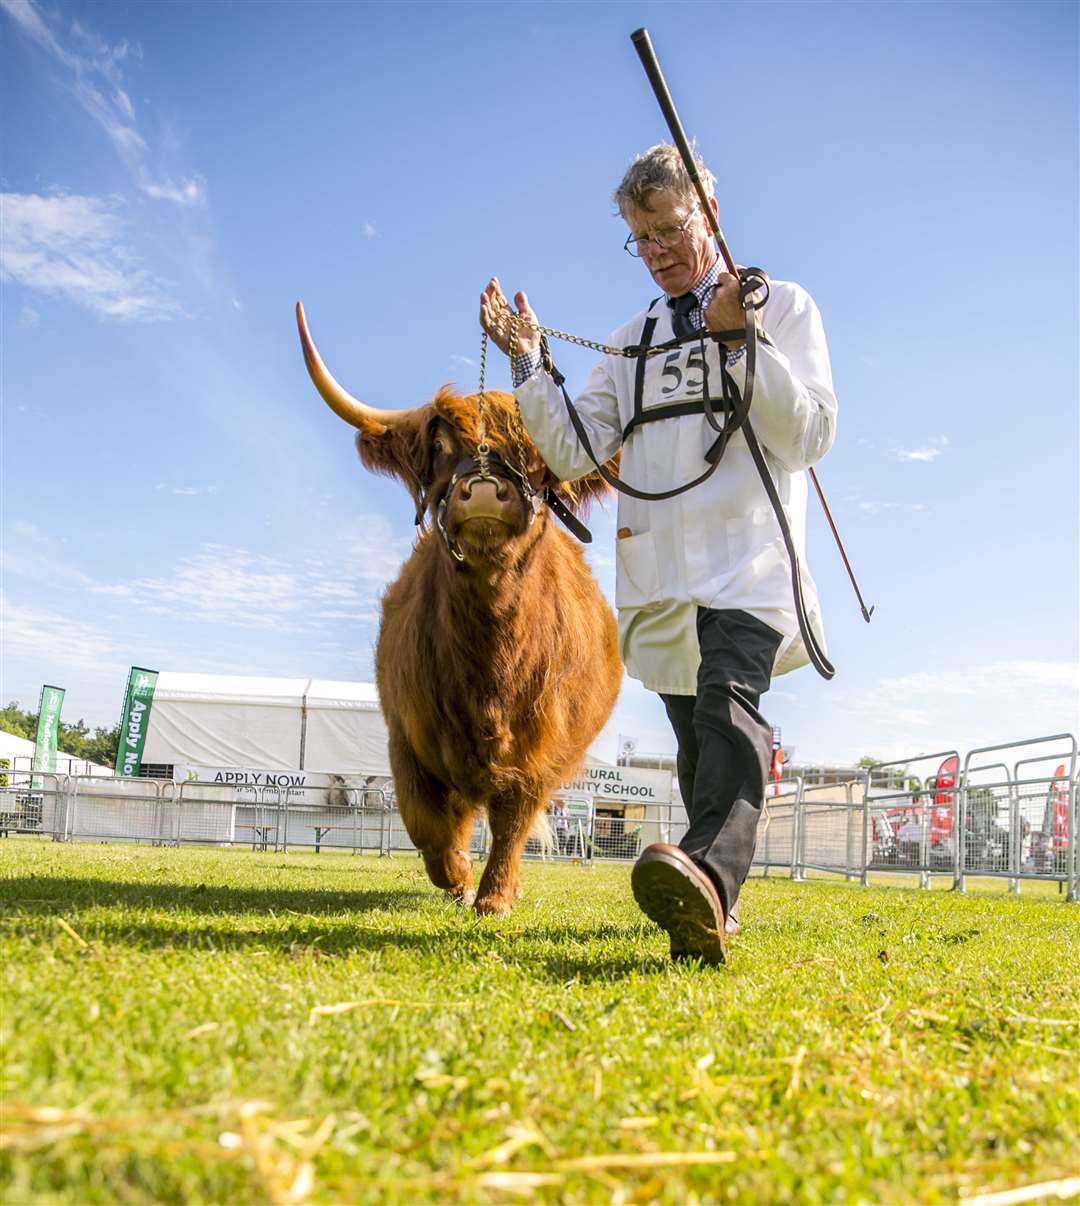 The Kent County Show is an agricultural showcase